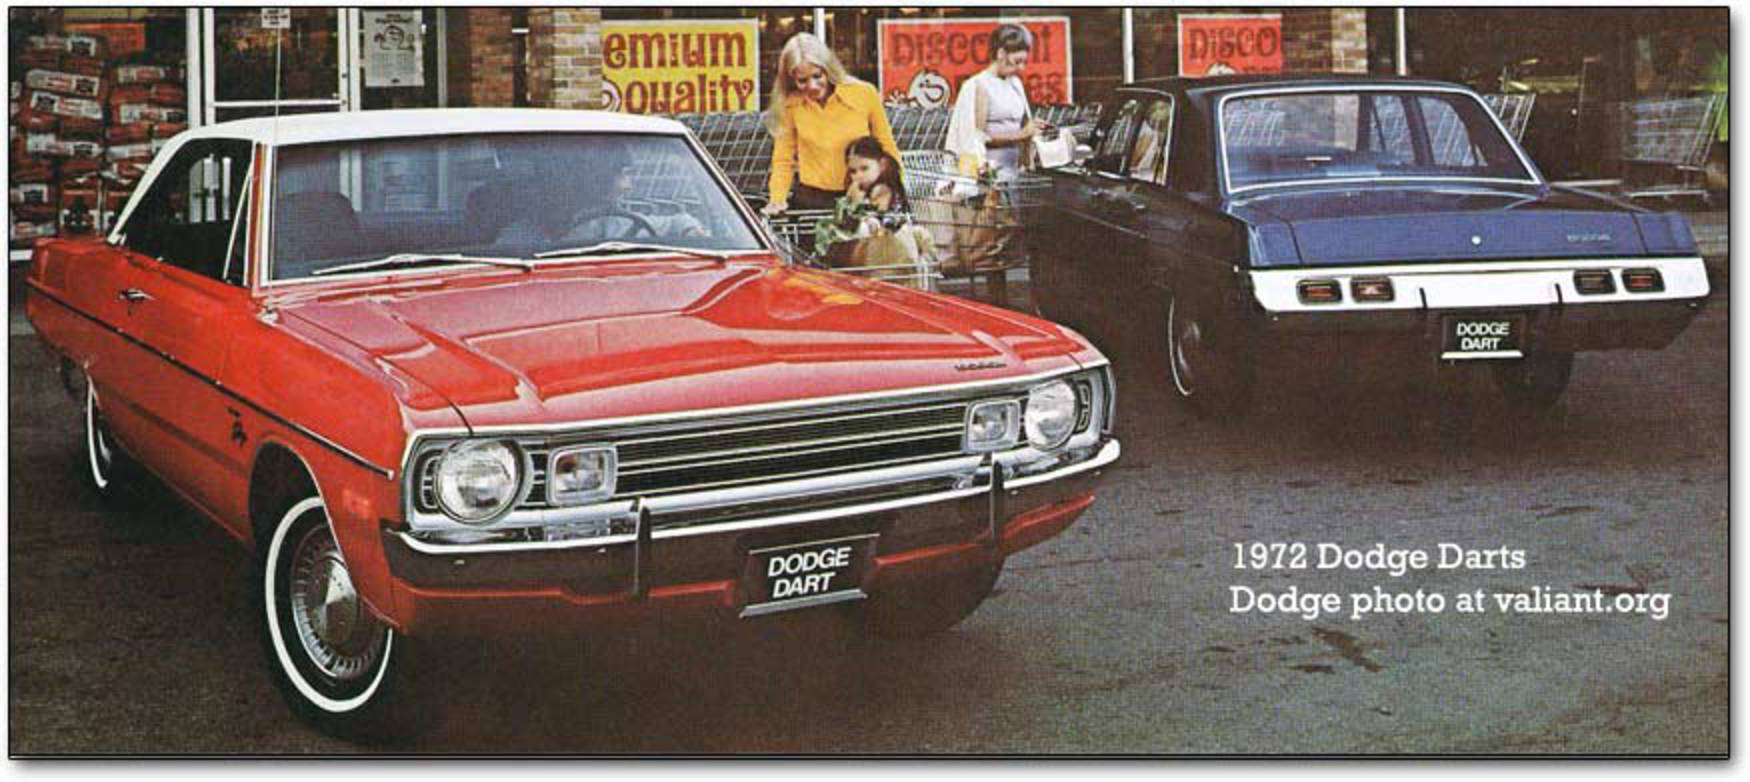 The 1972 Dodge Dart, Demon, and Swinger (Valiant, Duster, and Scamp were